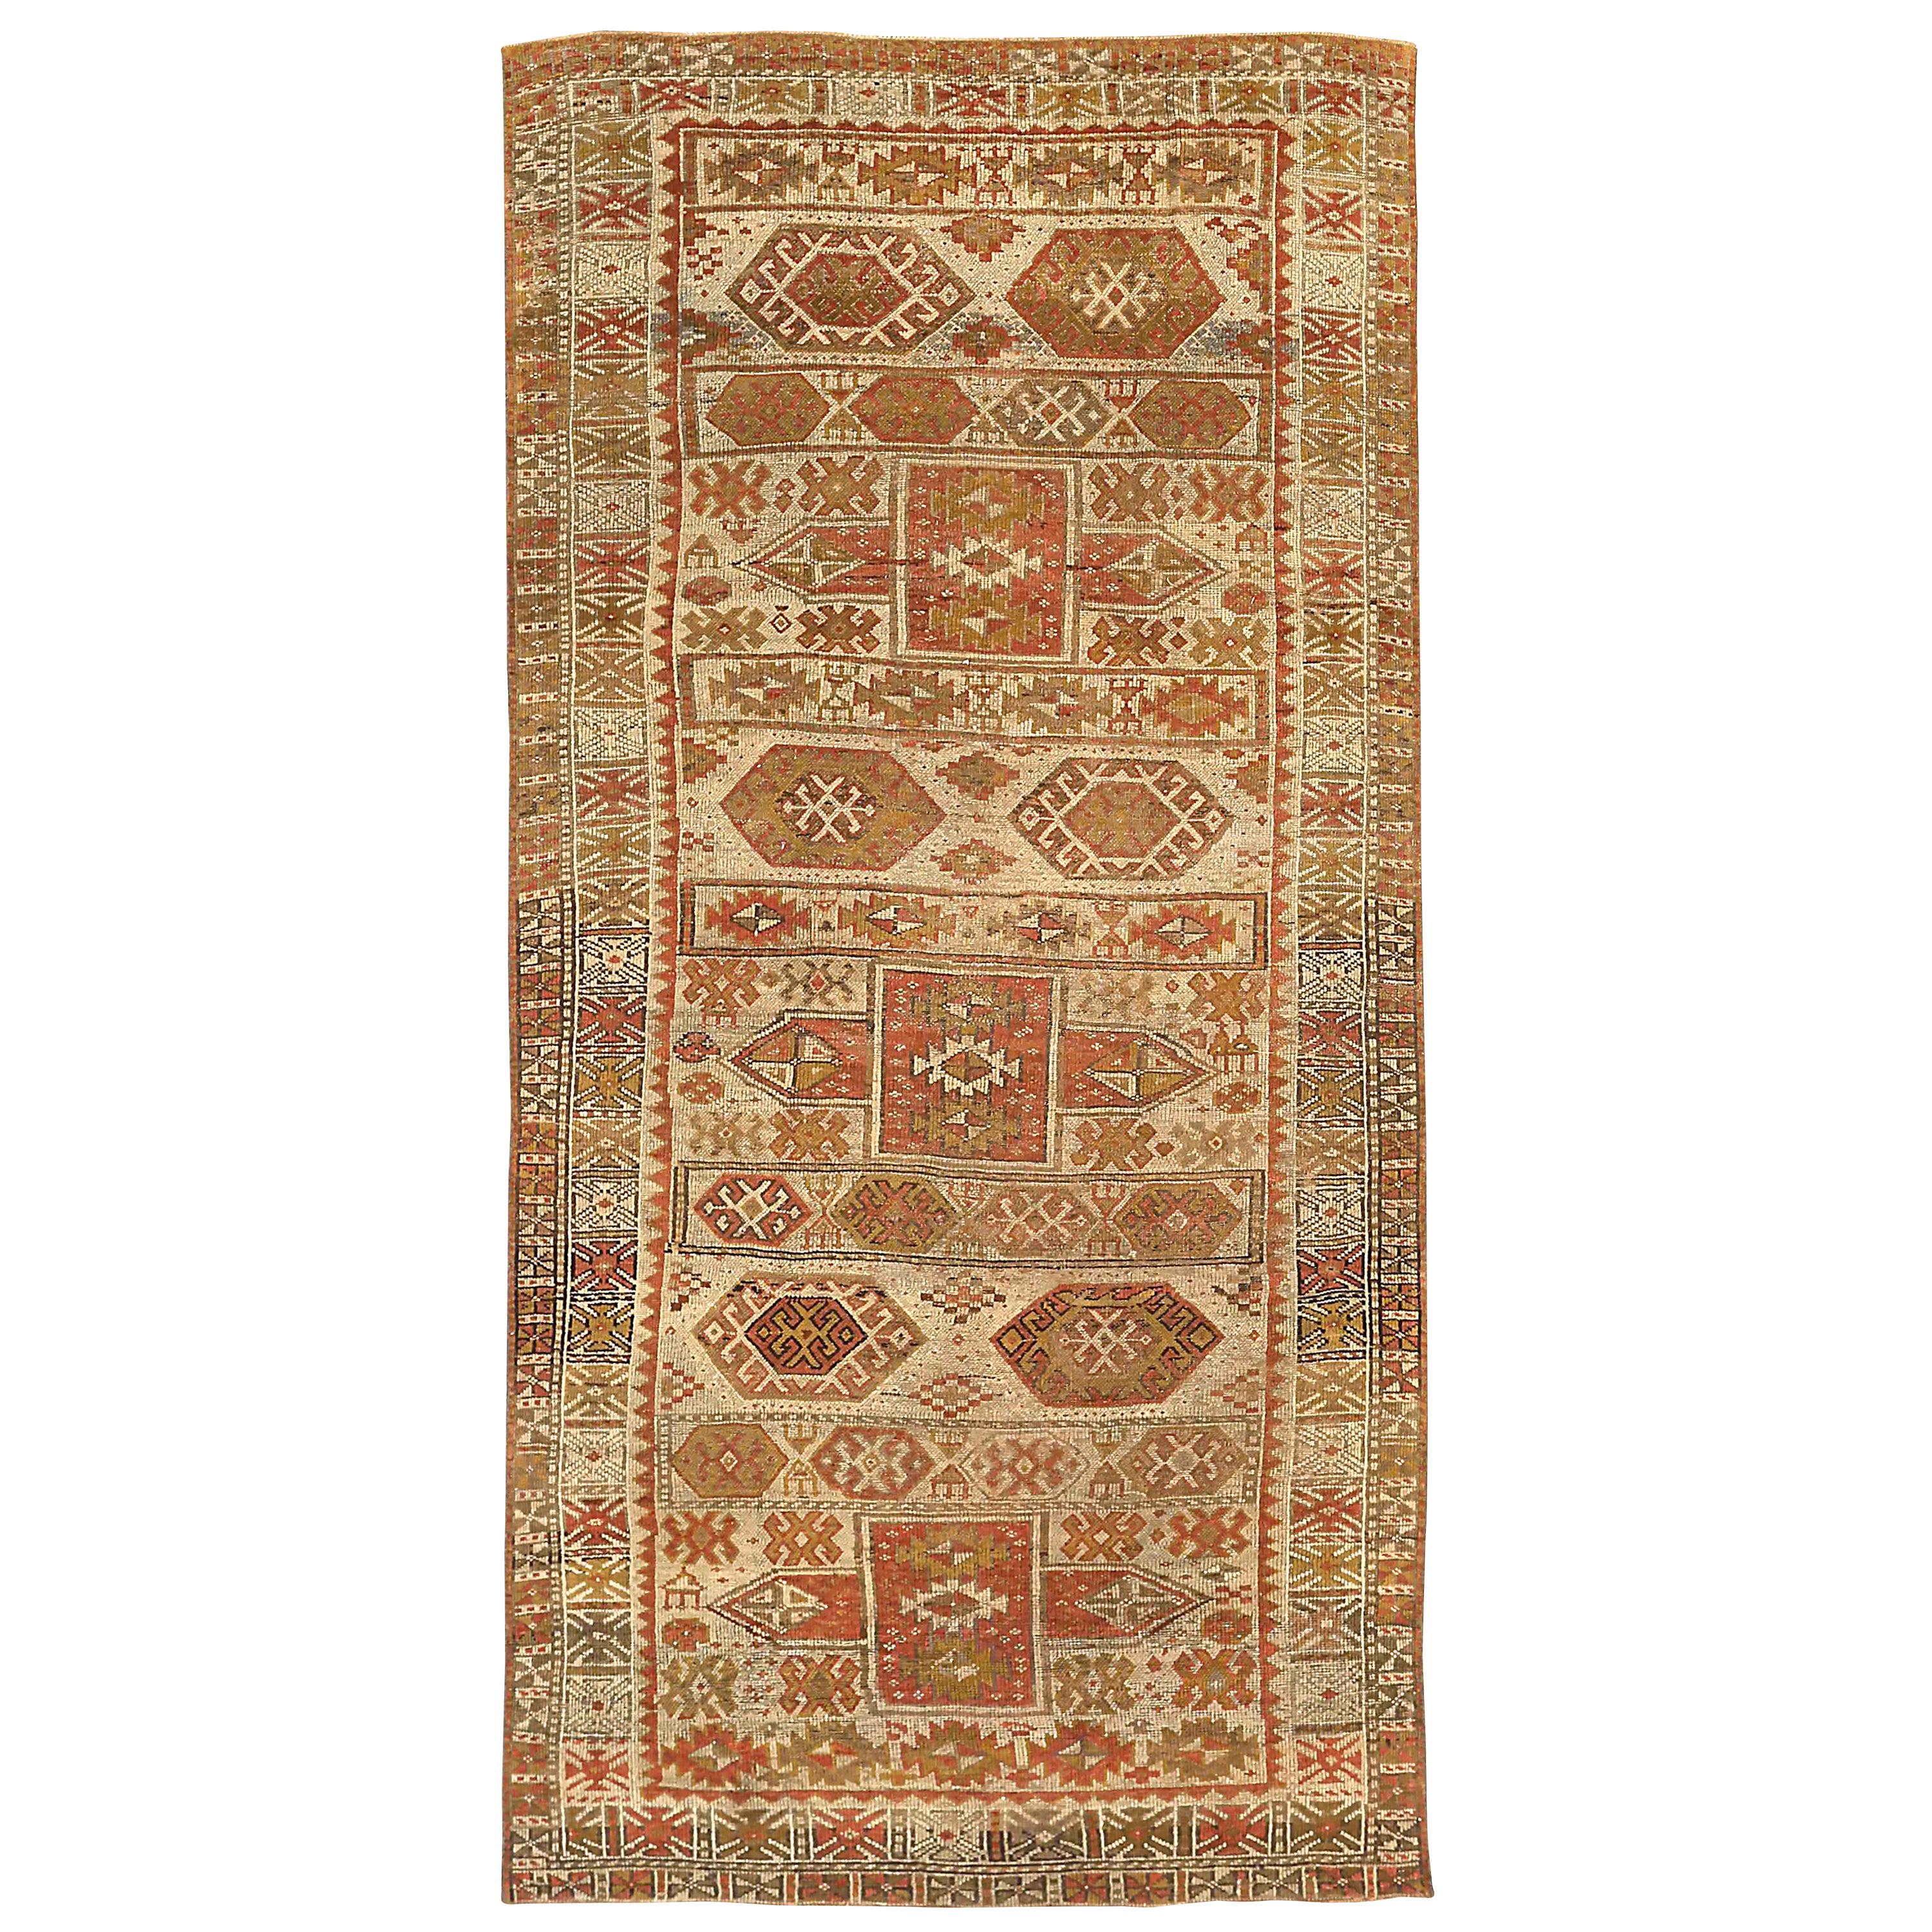 Antique Persian area rug handwoven from the finest sheep’s wool. It’s colored with all-natural vegetable dyes that are safe for humans and pets. It’s a traditional Kurdish design handwoven by expert artisans. It’s a lovely area rug that can be